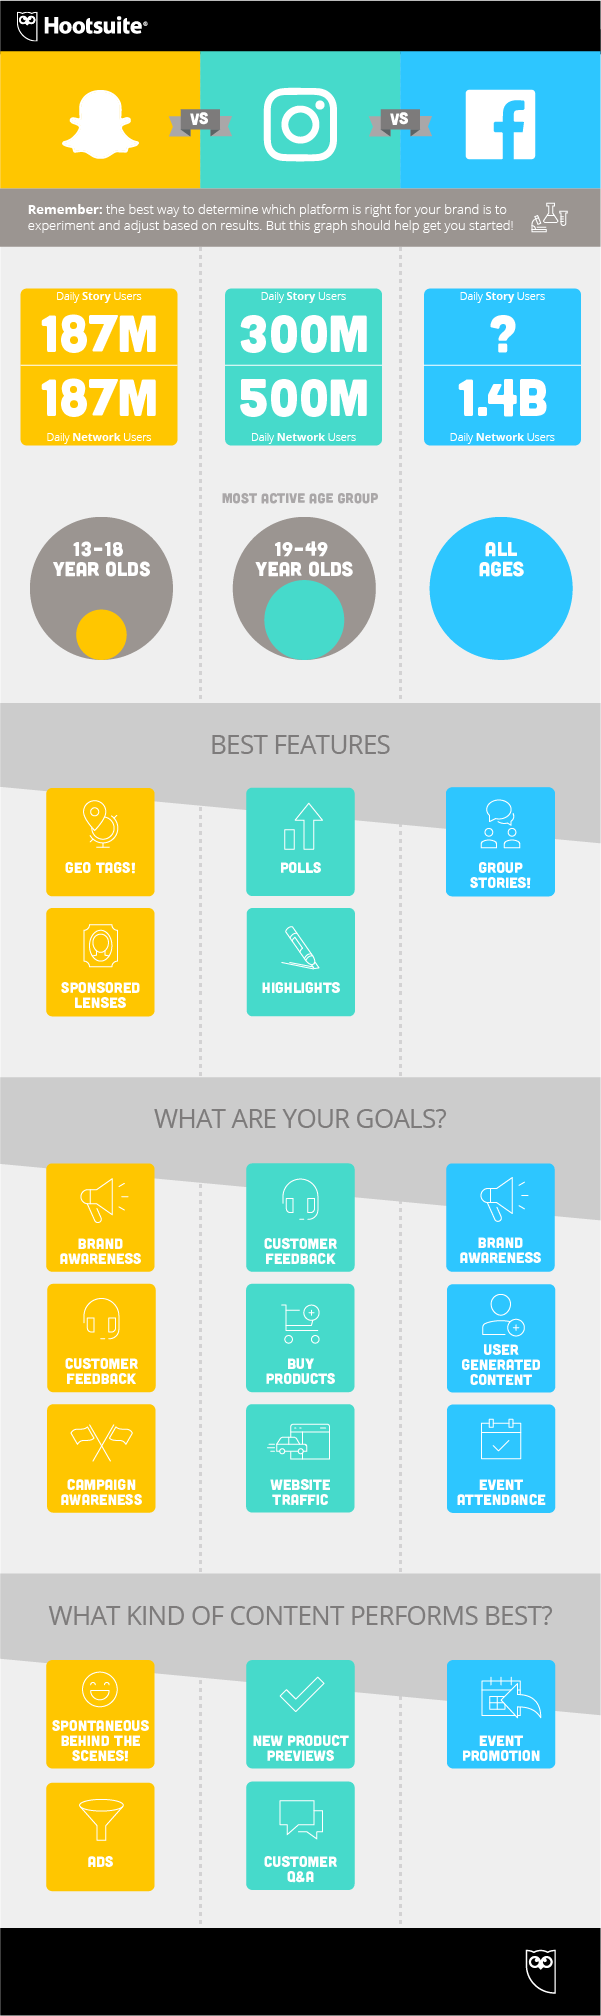 Which Social Media Stories Option is Best for Your Brand? [Infographic]